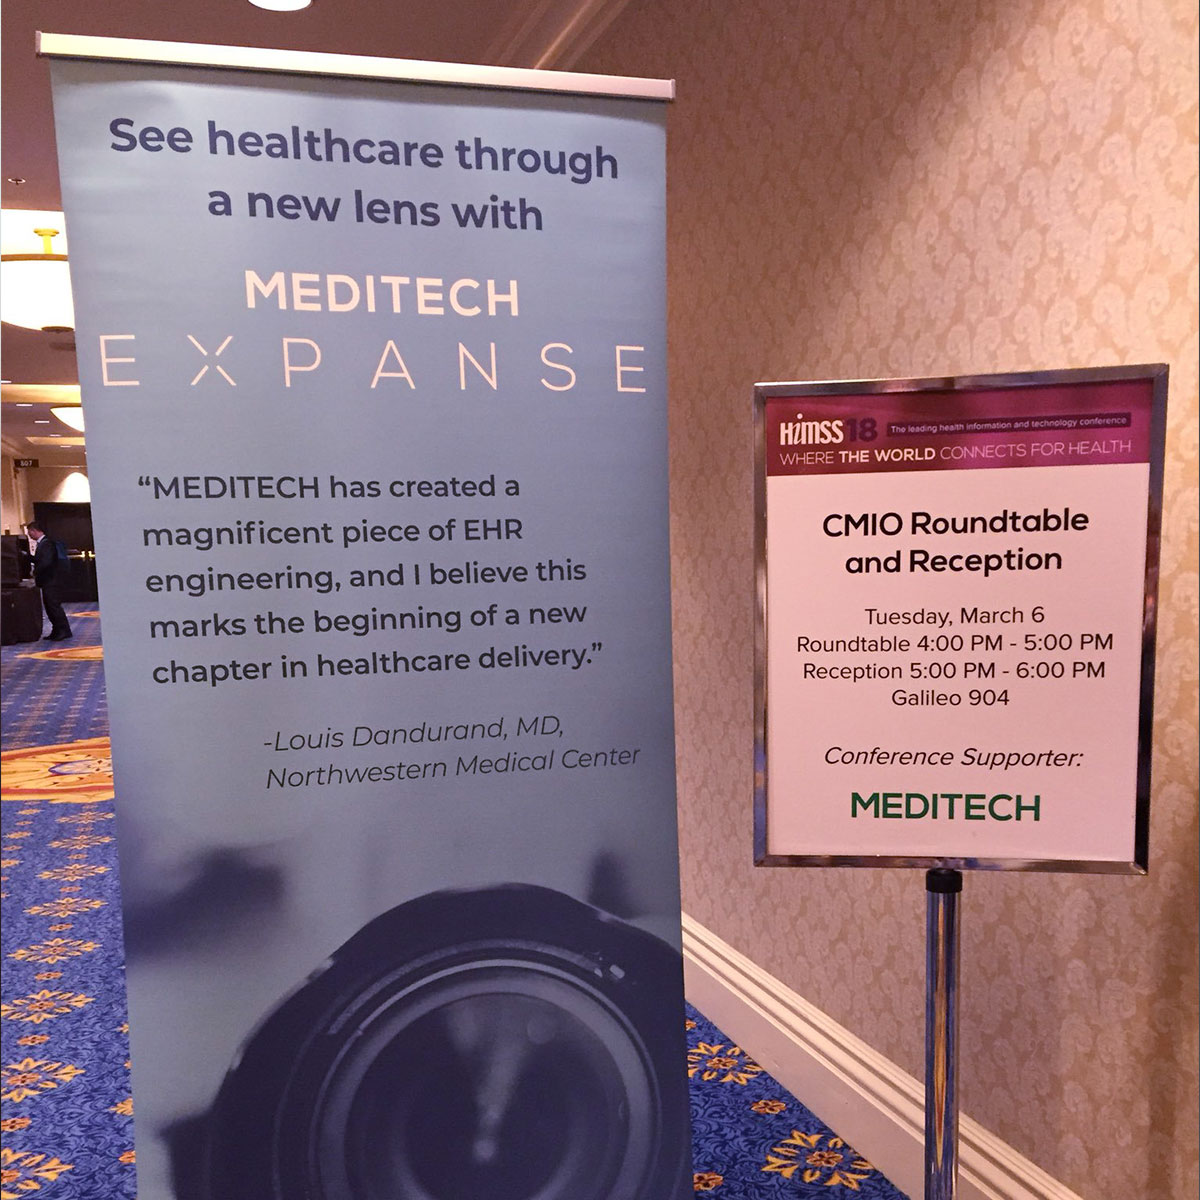 MediTech Expanse Brand Identity Consulting: 2018 HIMSS Conference Rollup Banner